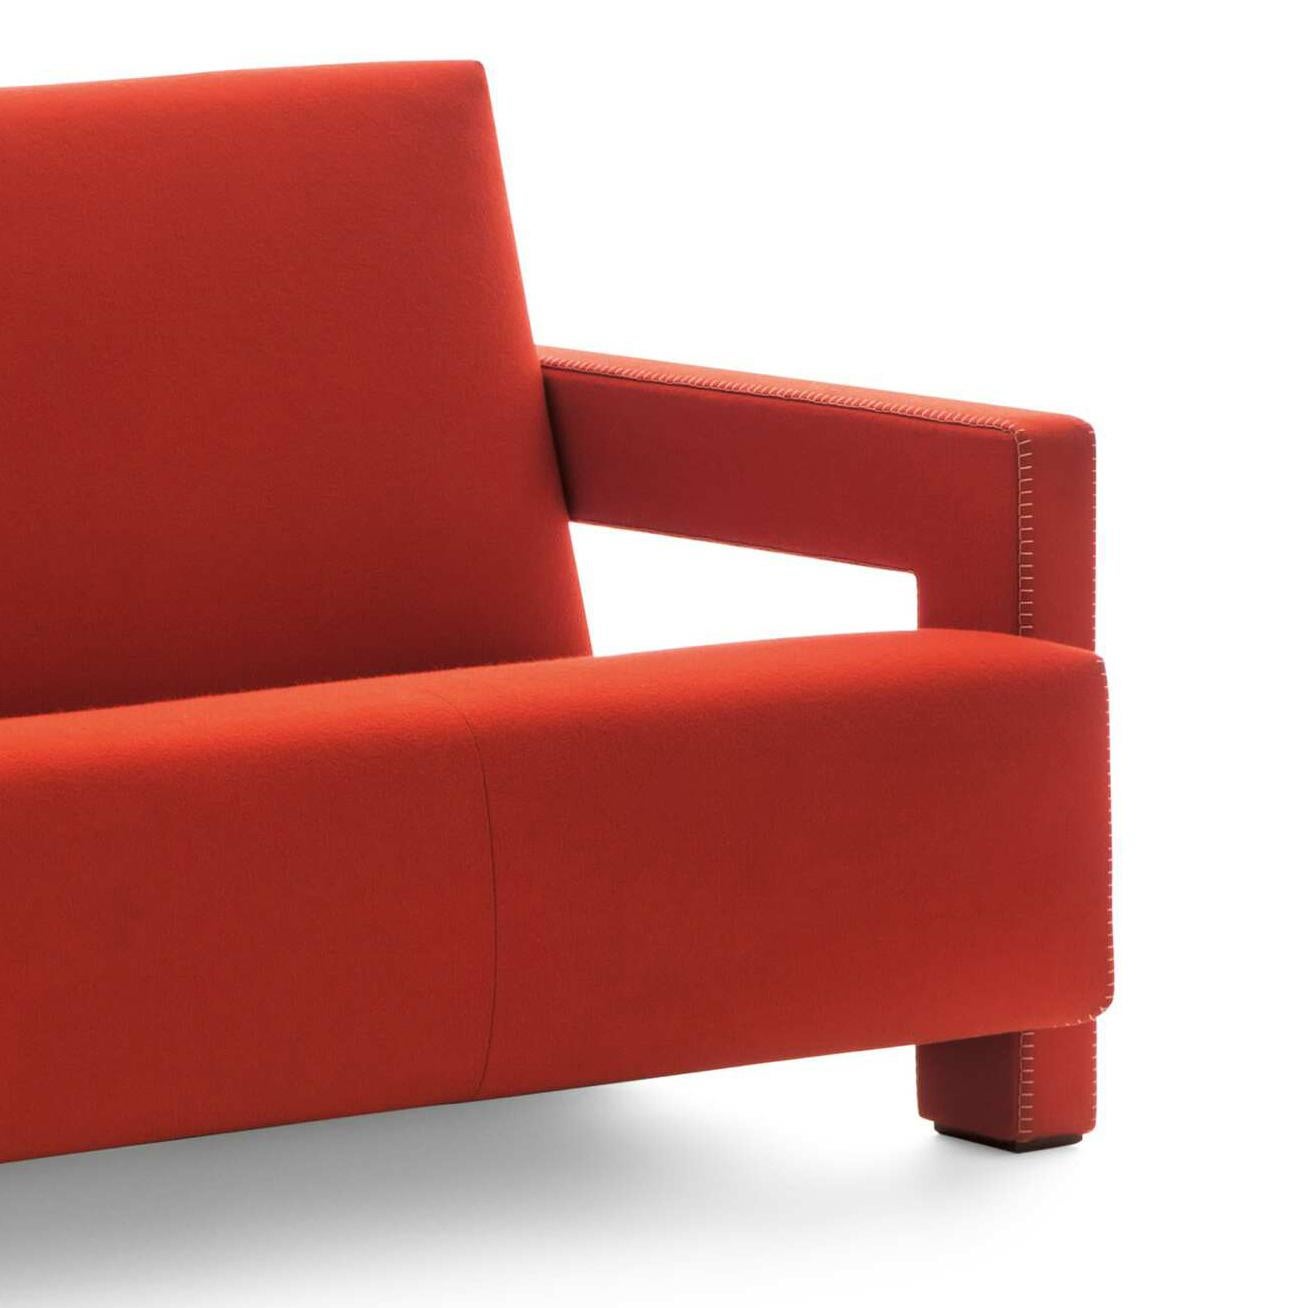 Contemporary Gerrit Thomas Rietveld Red Wide Utrech Armchair by Cassina For Sale